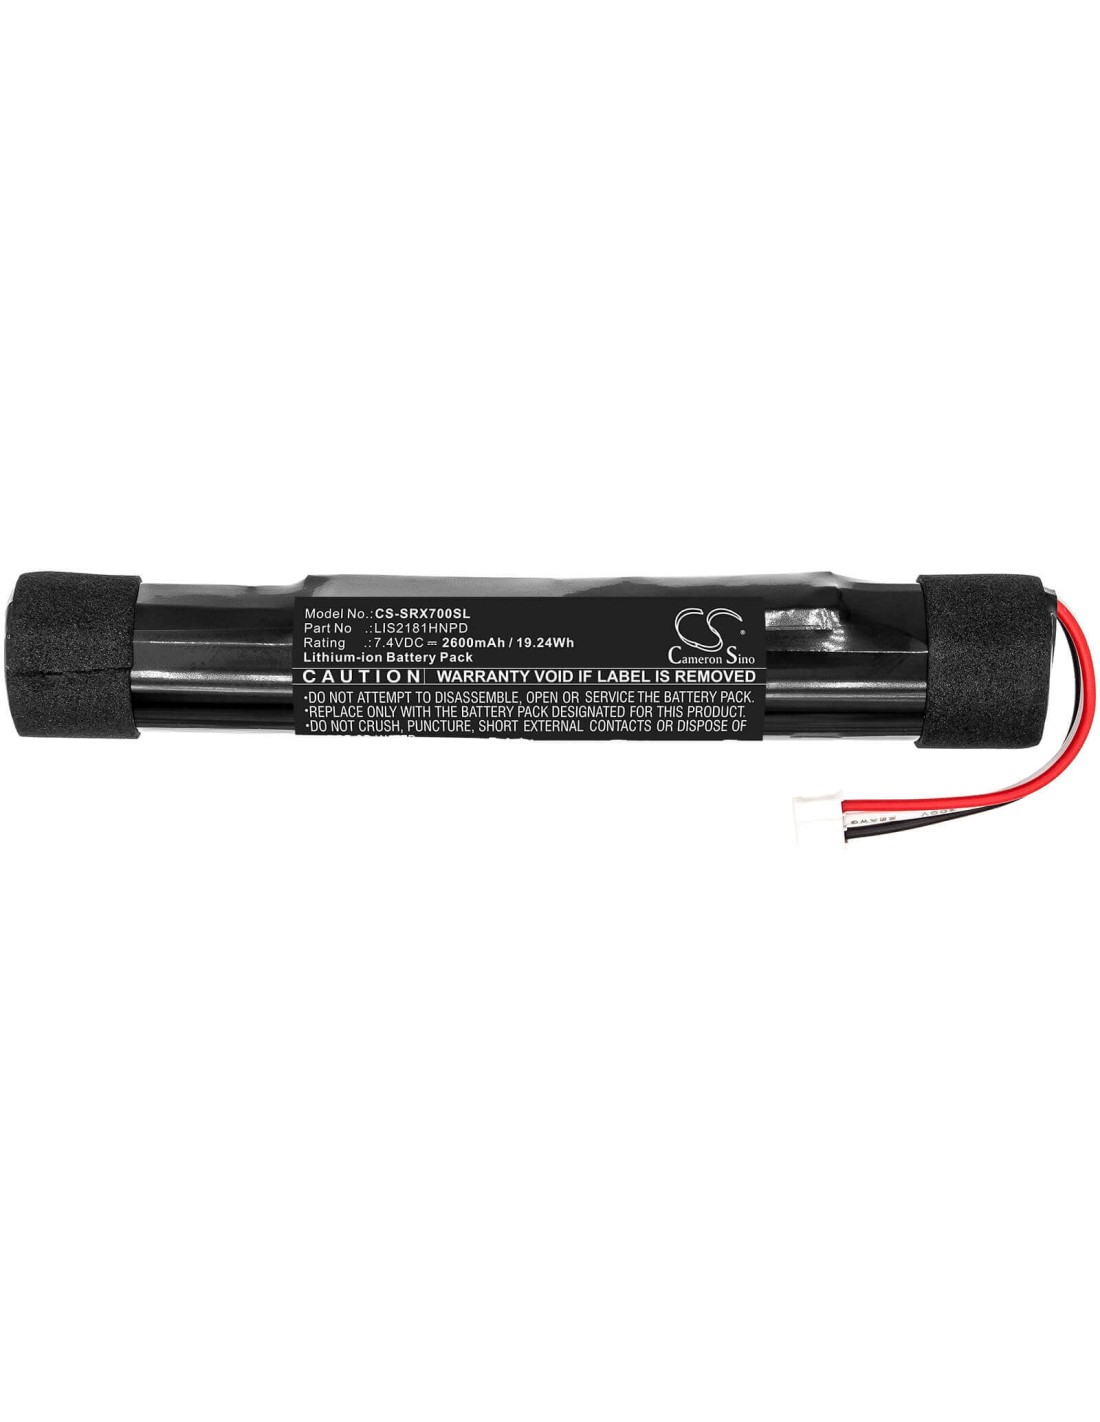 Battery for Sony, Srs-x7 7.4V, 2600mAh - 19.24Wh